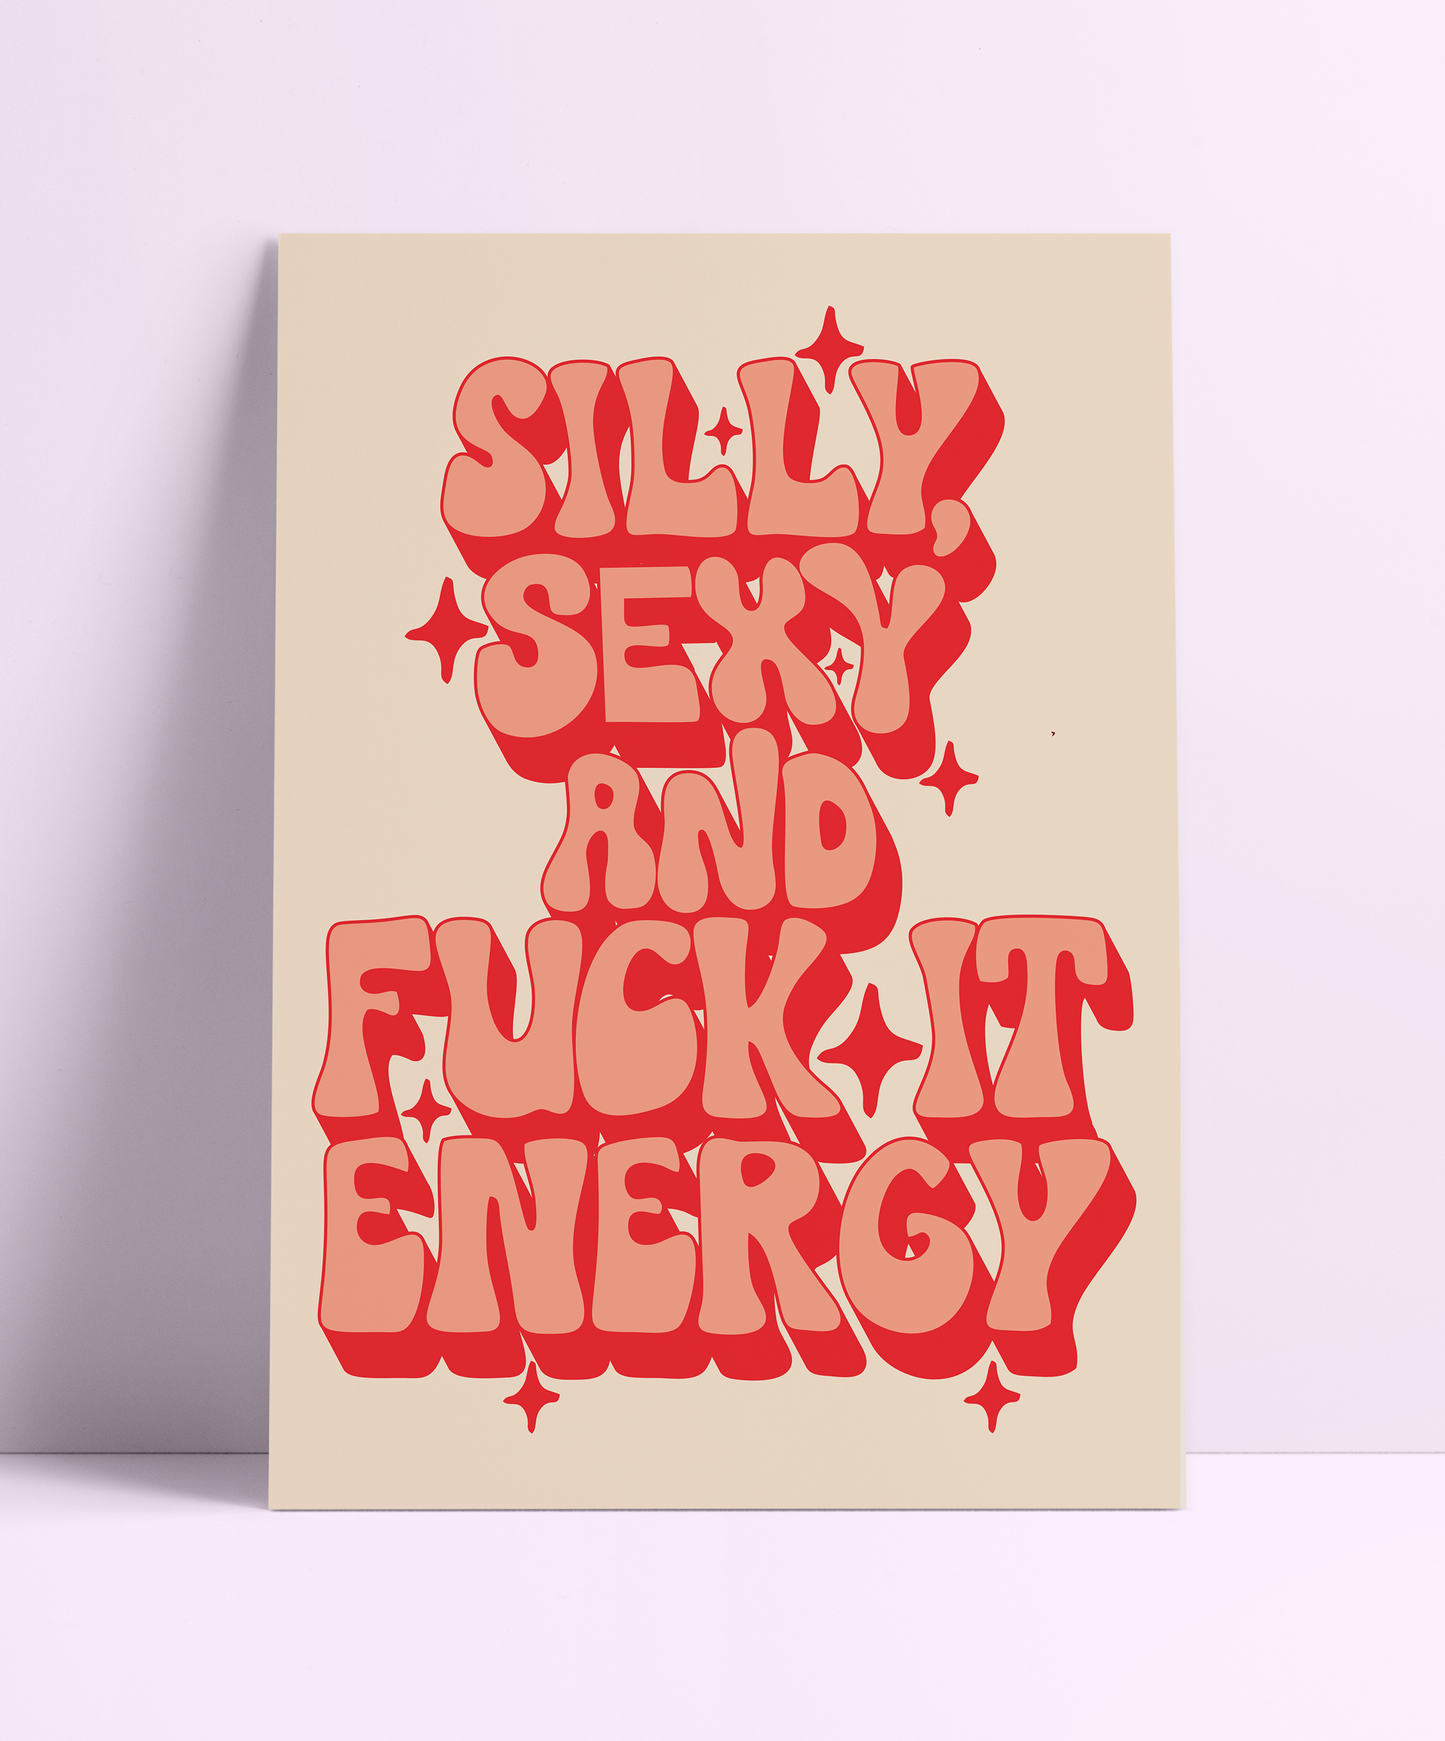 Silly & Sexy Energy Wall Print